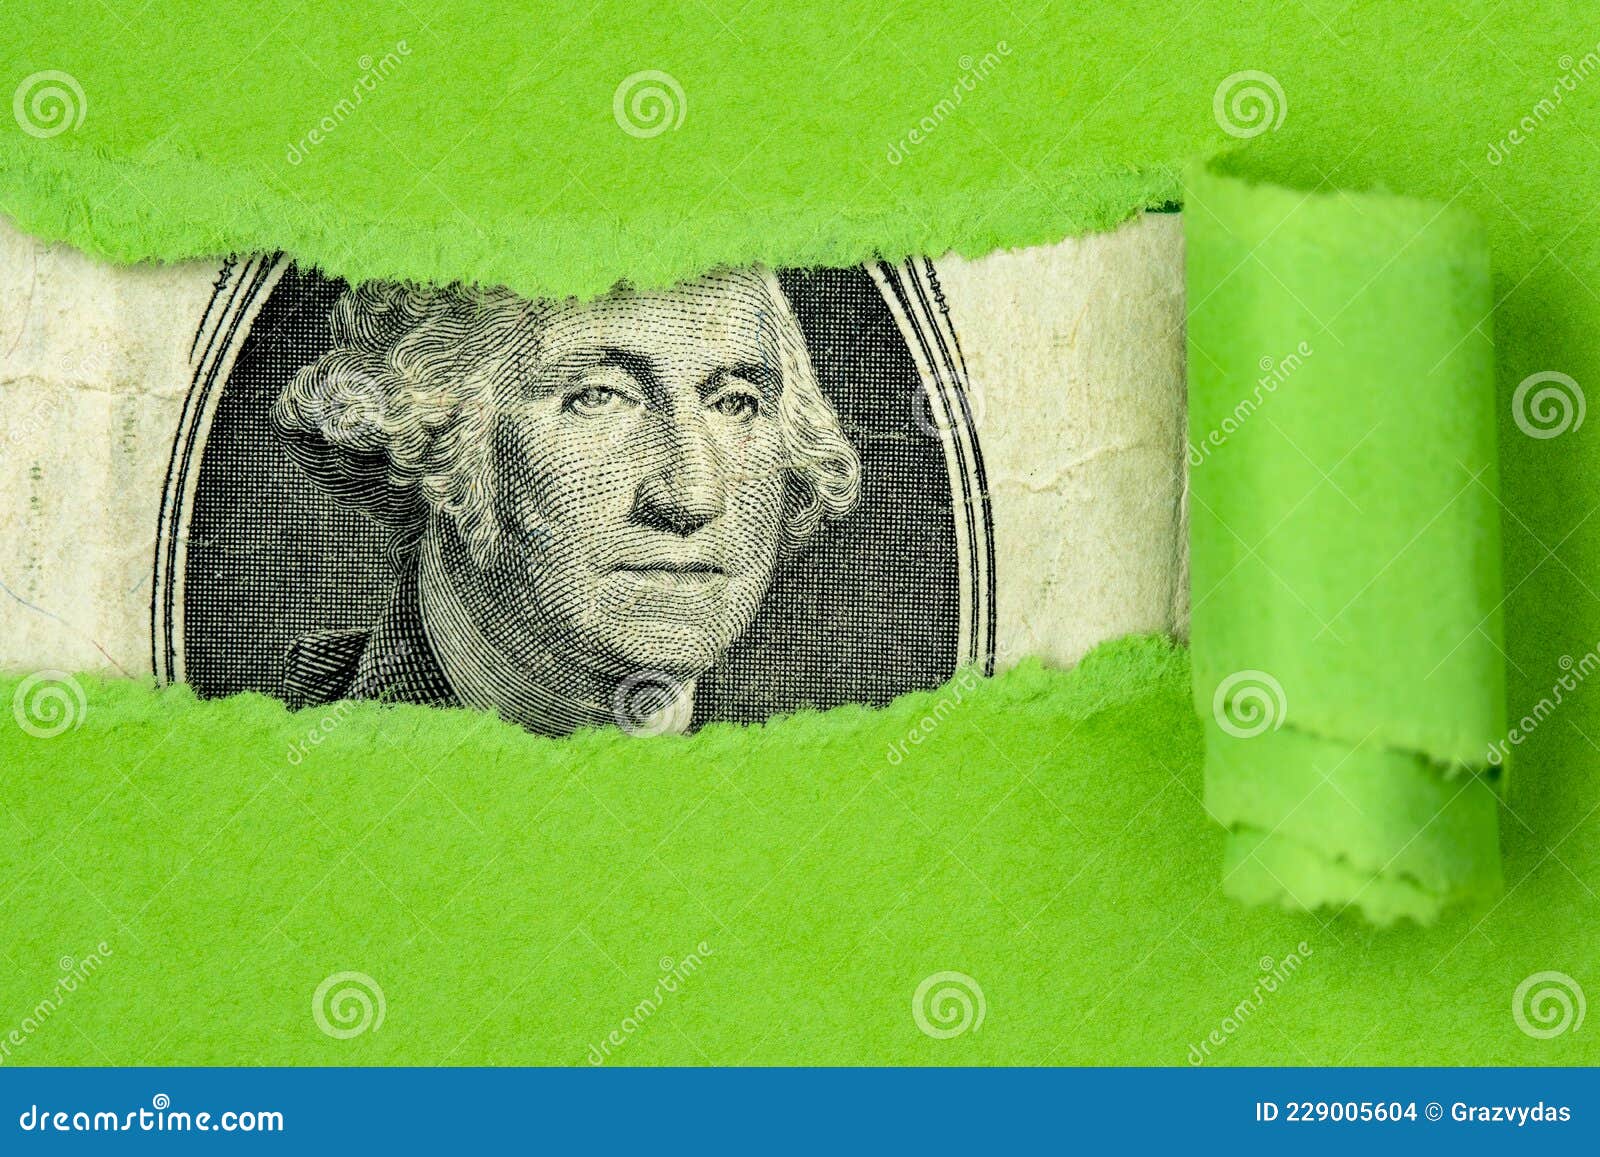 US Currency Peeking through Torn Green Paper Stock Photo Image of